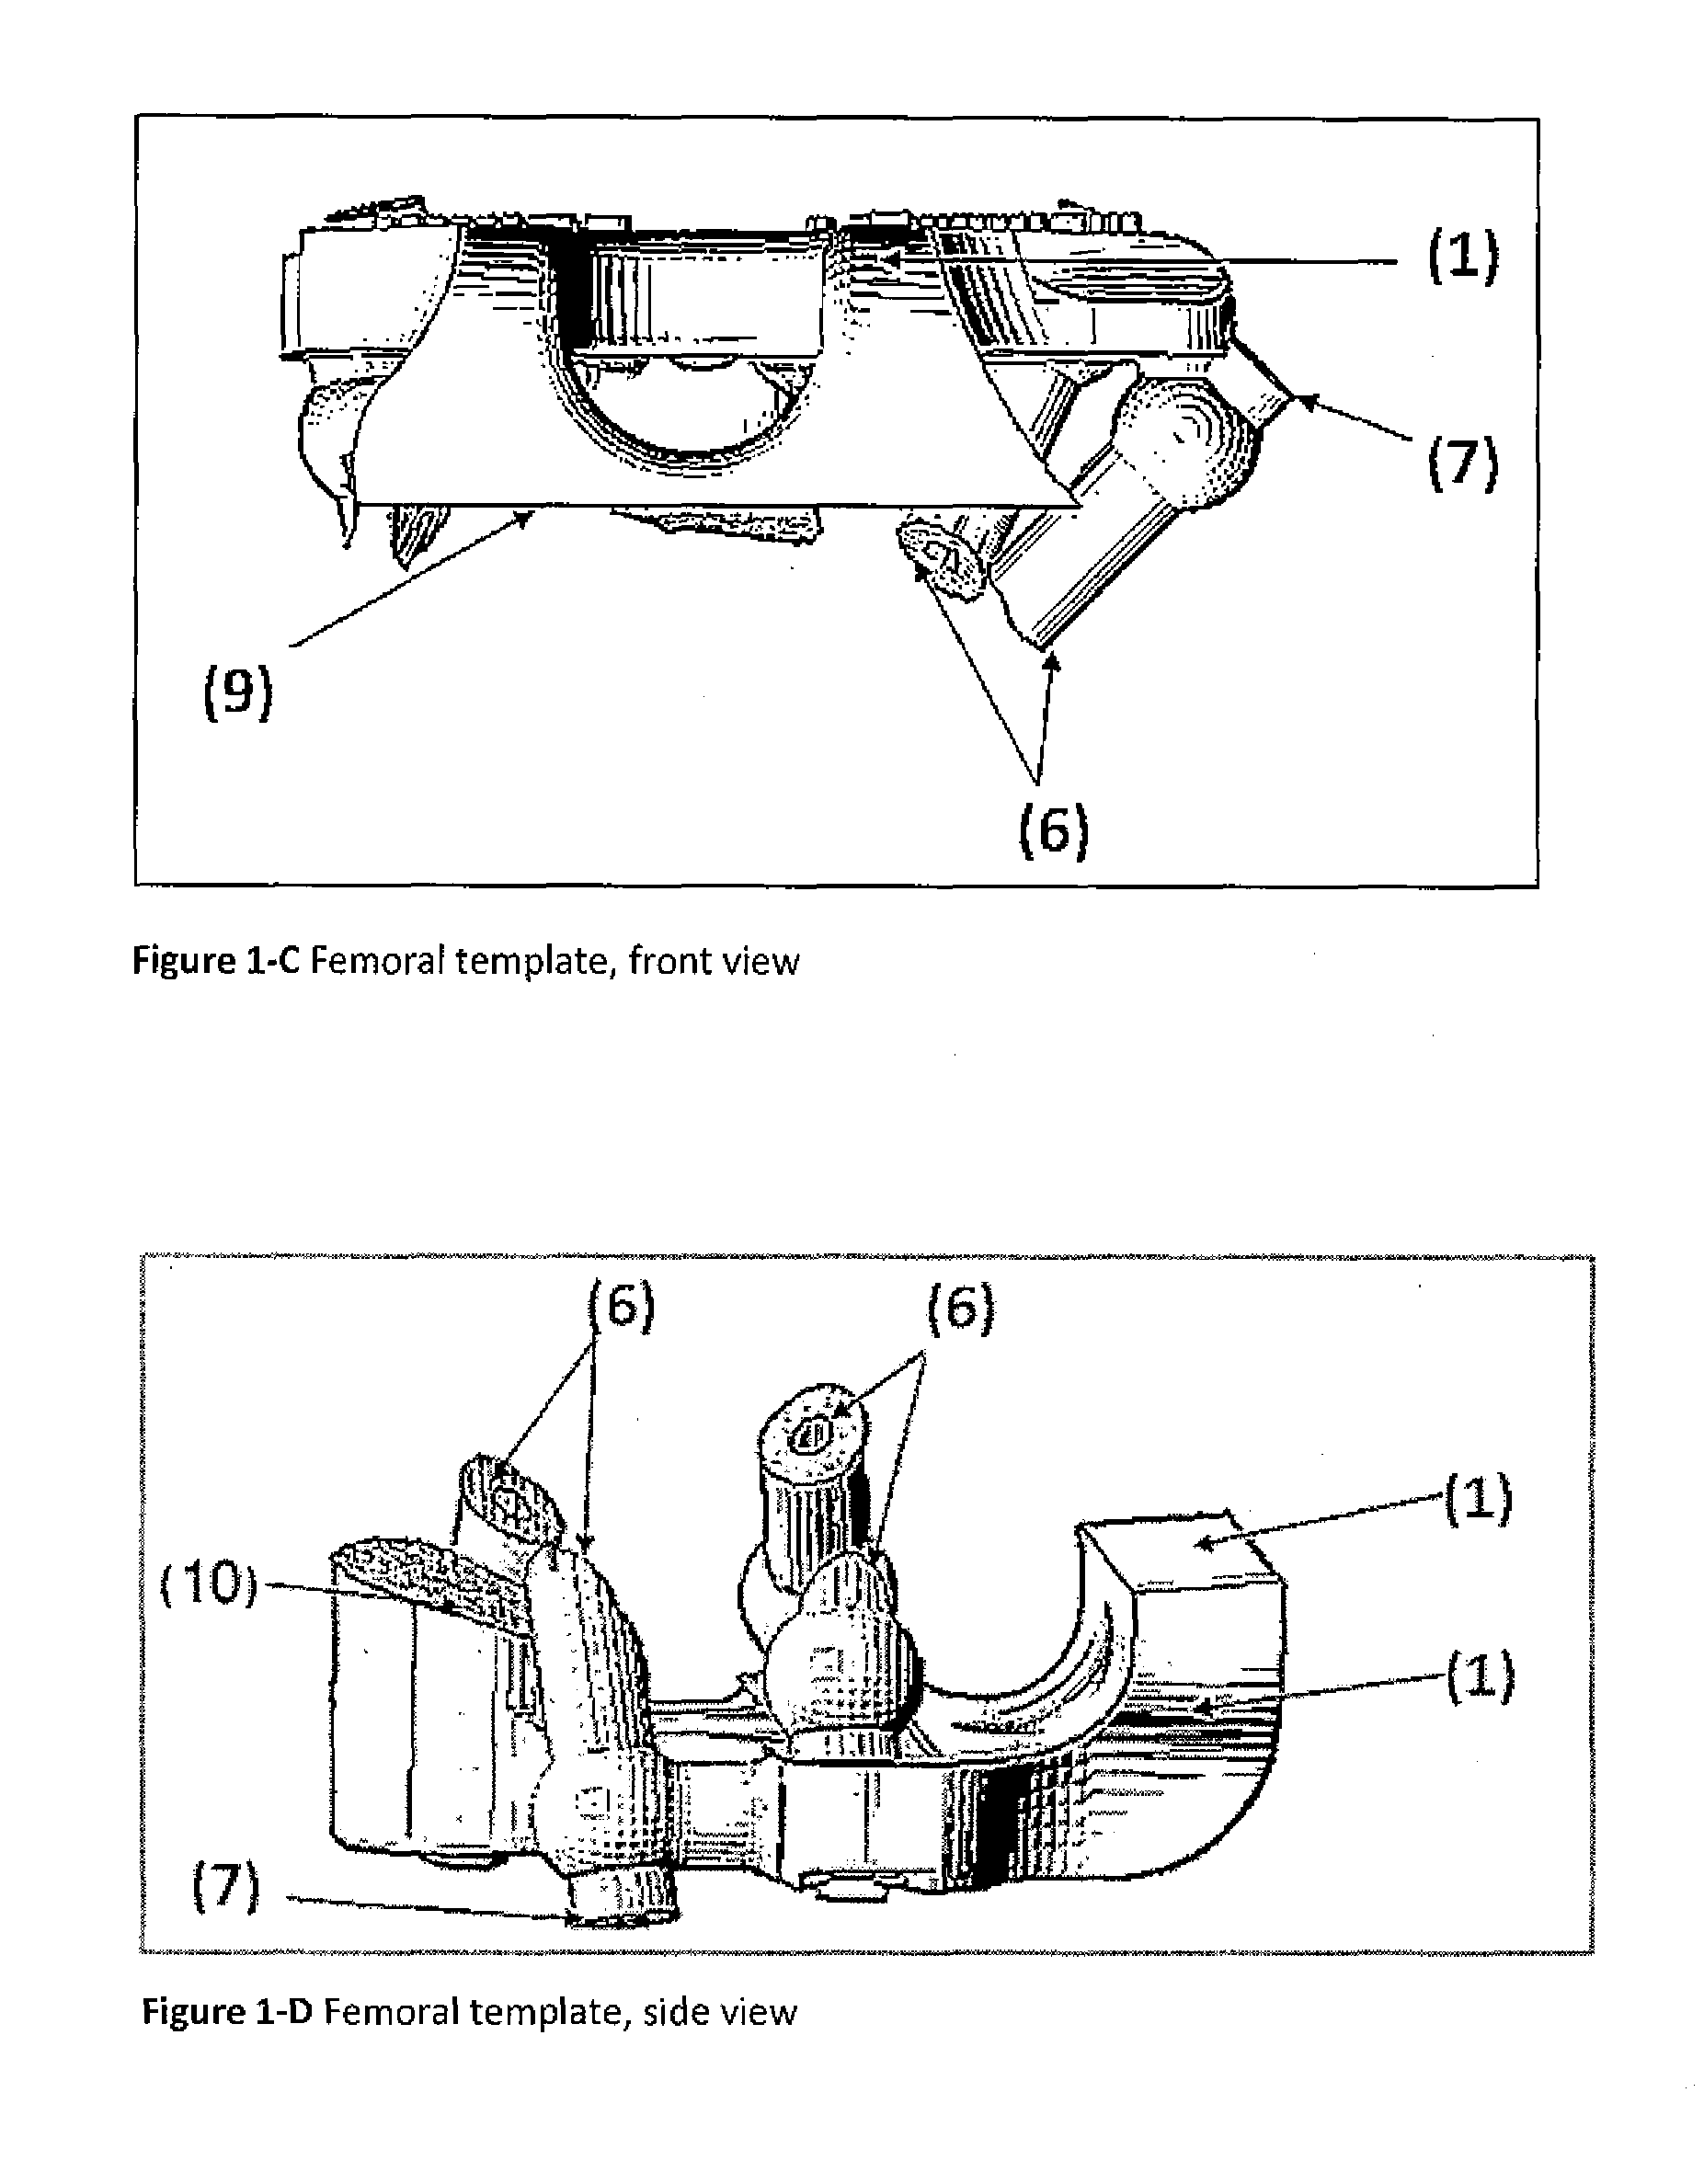 Device and method for fitting an artificial knee joint using universal electronic templates which can be adapted to all artificial joints